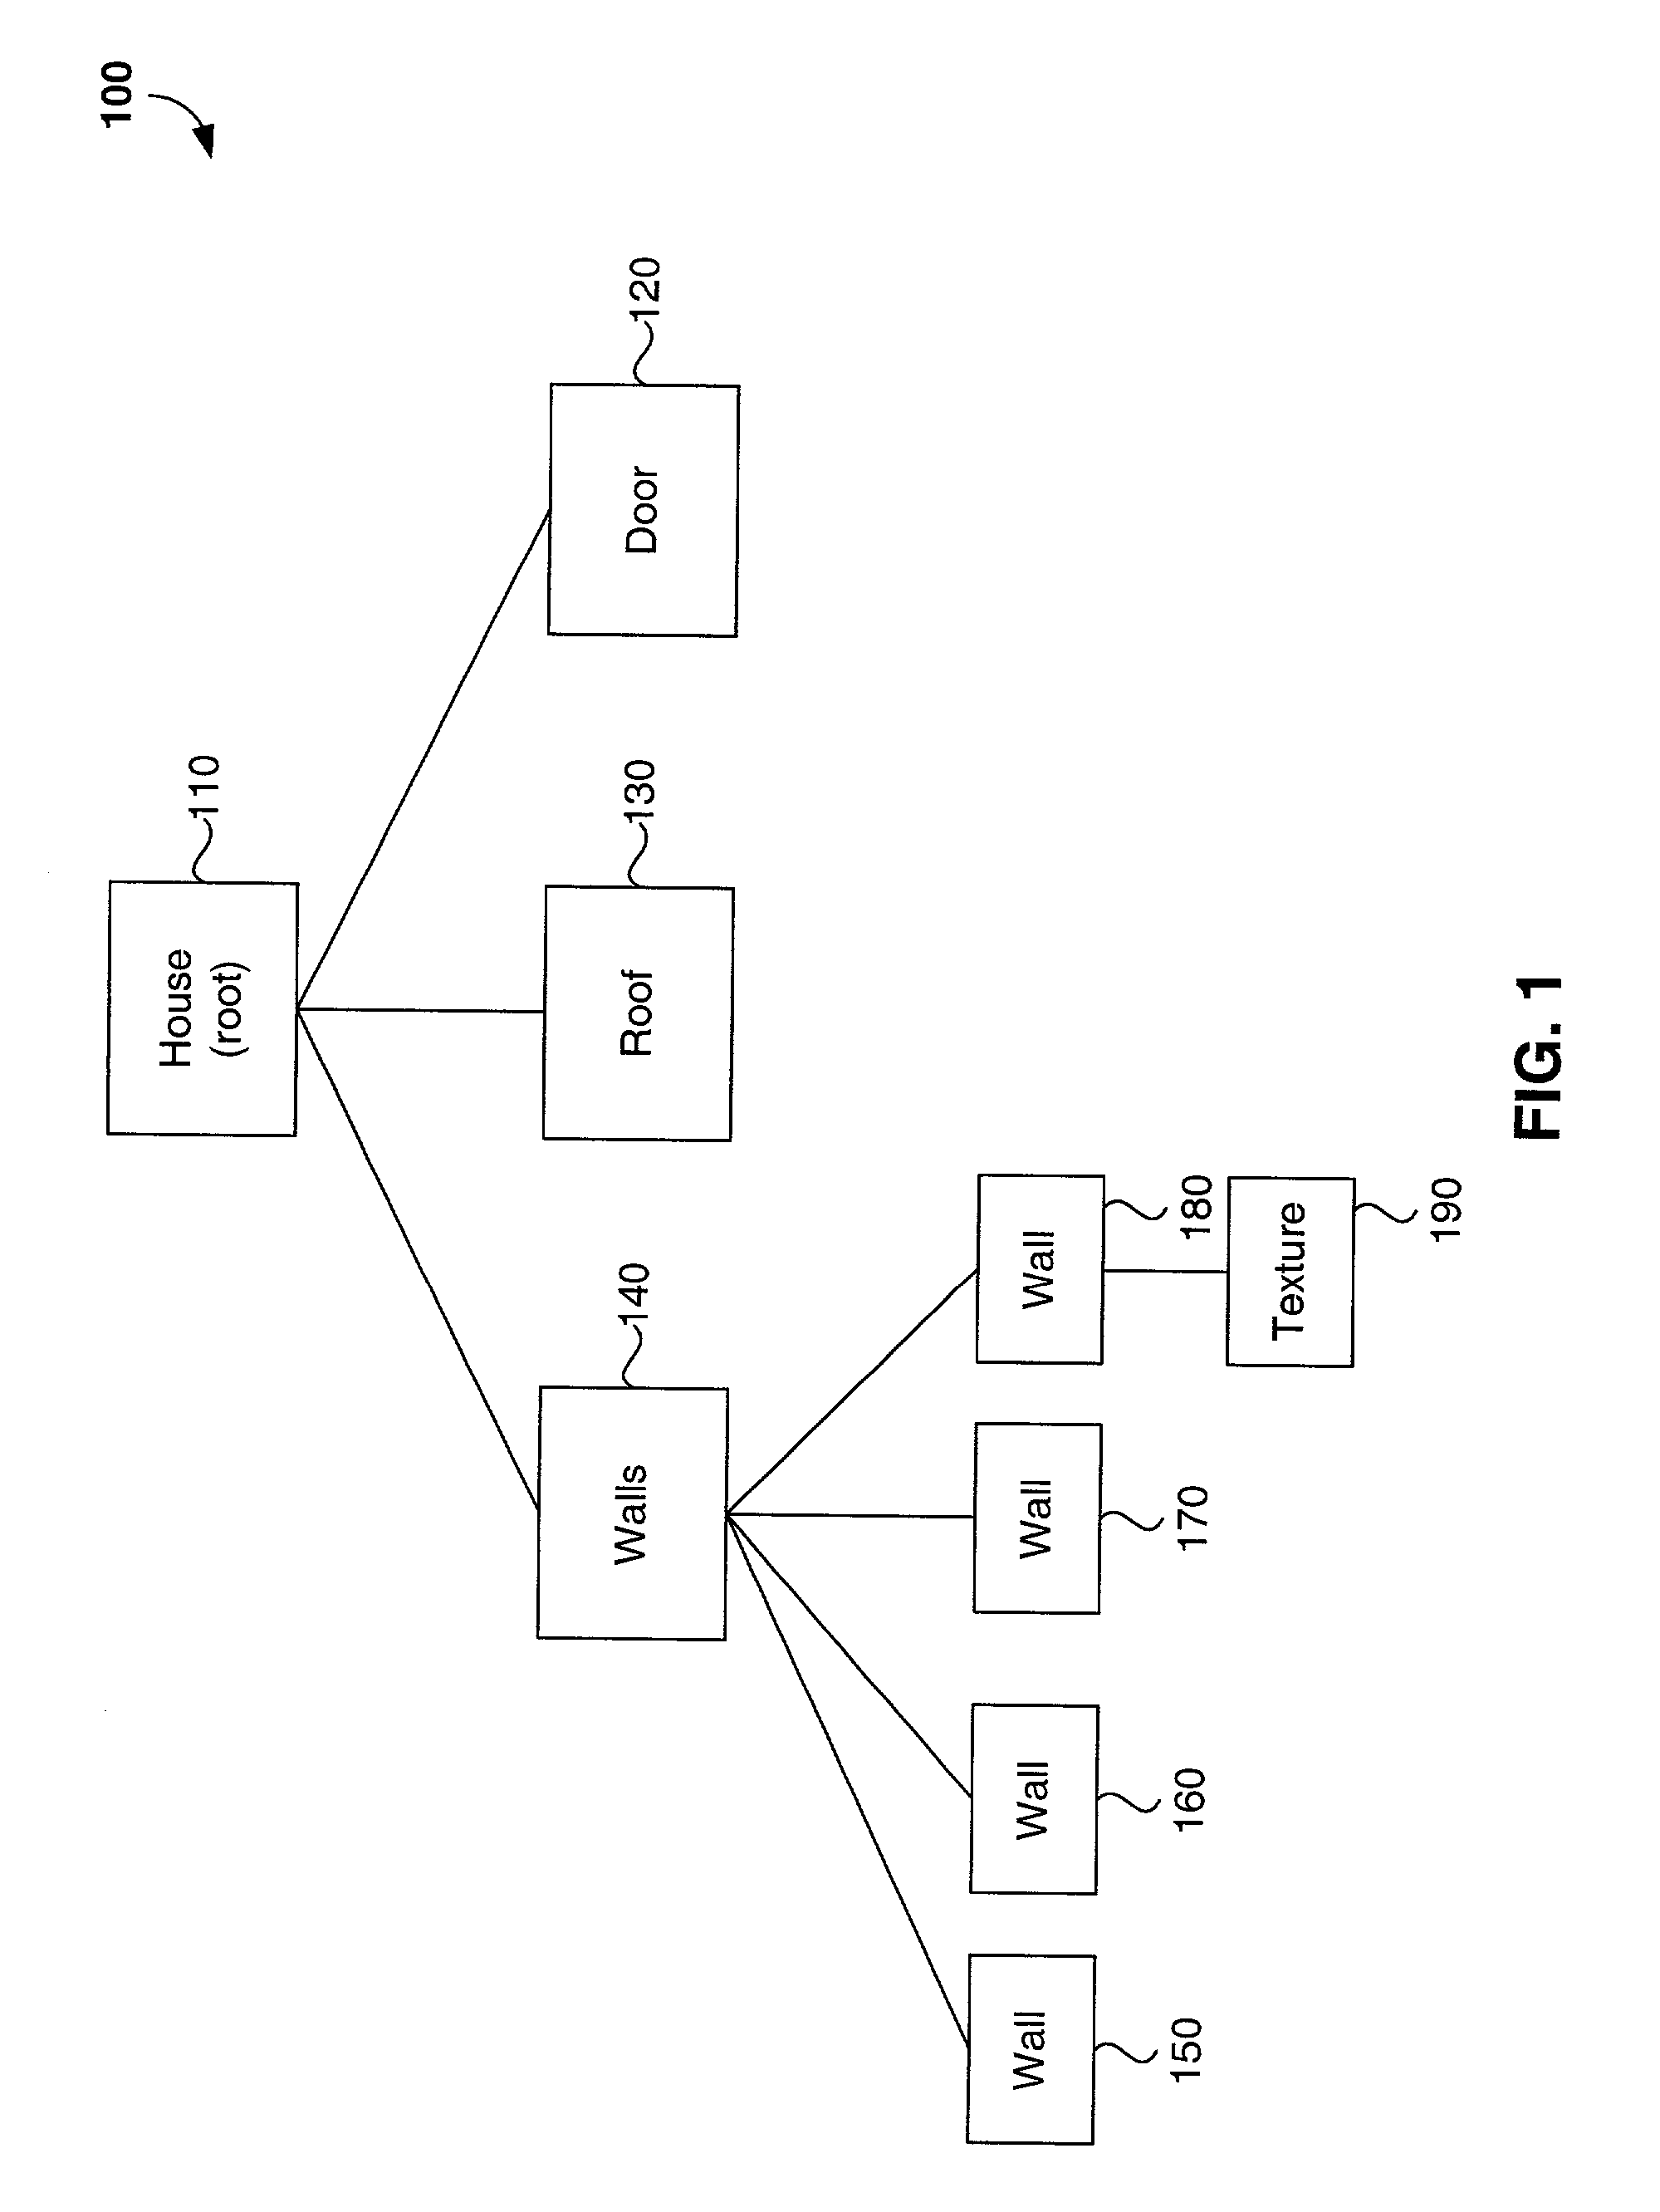 System, method, and computer program product for optimization of a scene graph